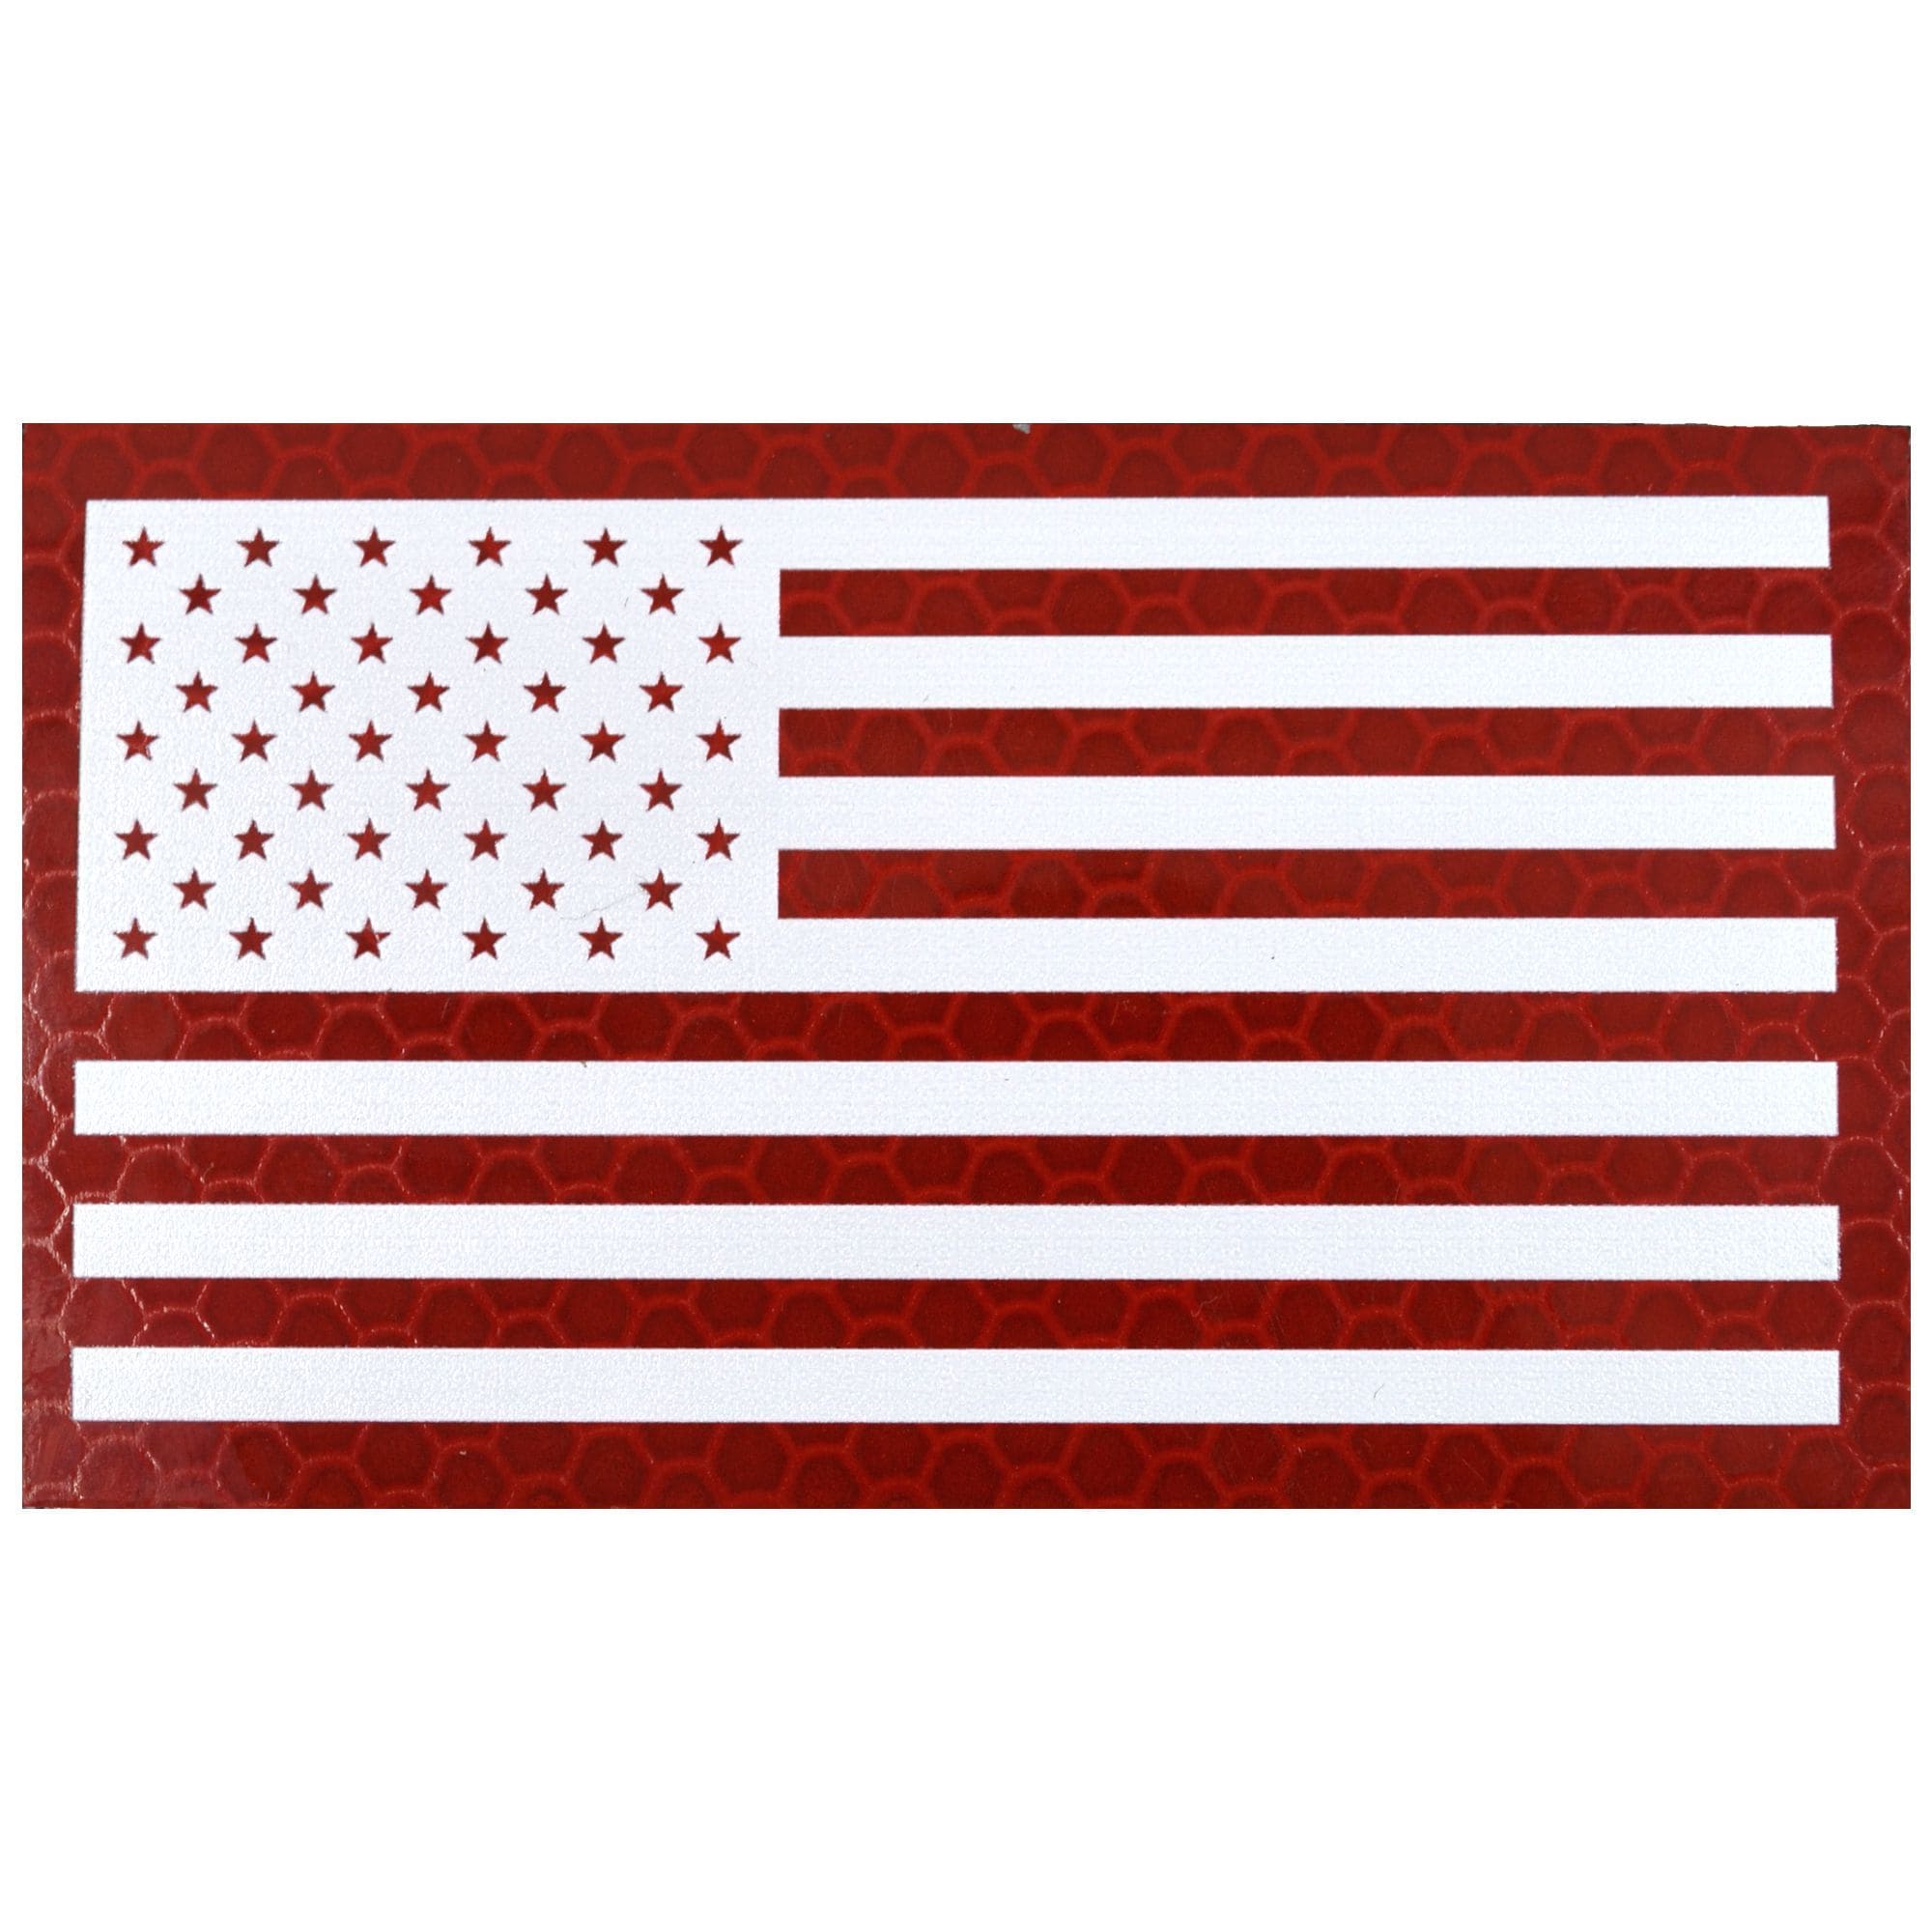 Tactical Gear Junkie Patches Forward Reflective Printed Red/White USA Flag - 2x3.5 Patch